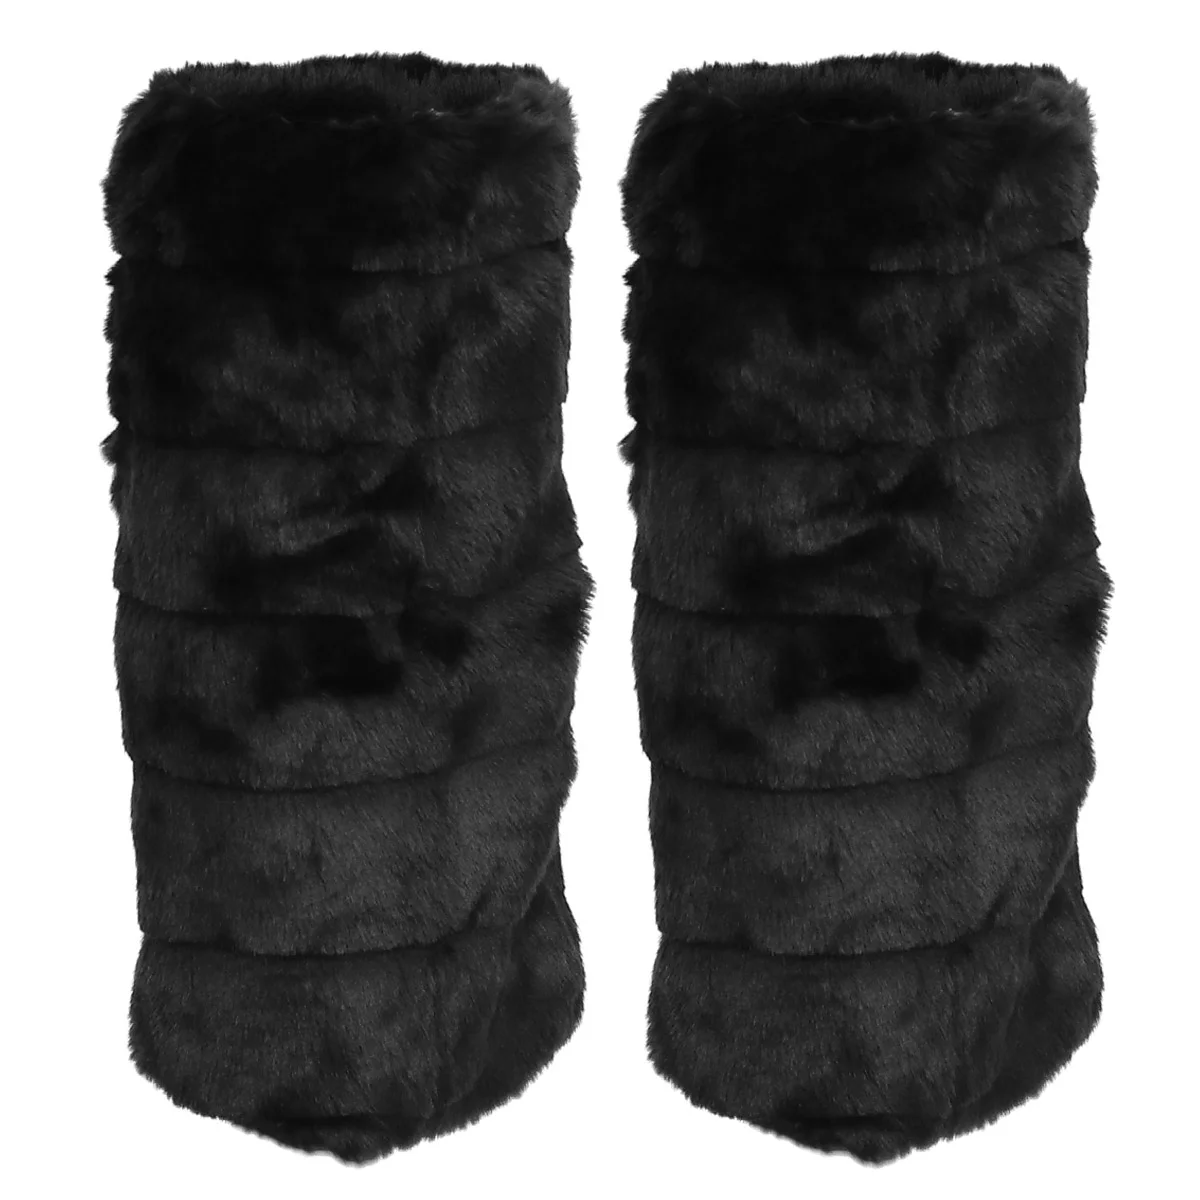 

Leg Boot Fur Warmer Warmers Cuff Winter Cuffs Faux Women Warm Furry Cover Womens Fuzzy Ladies Sleeves Socks Covers Toppers Knee